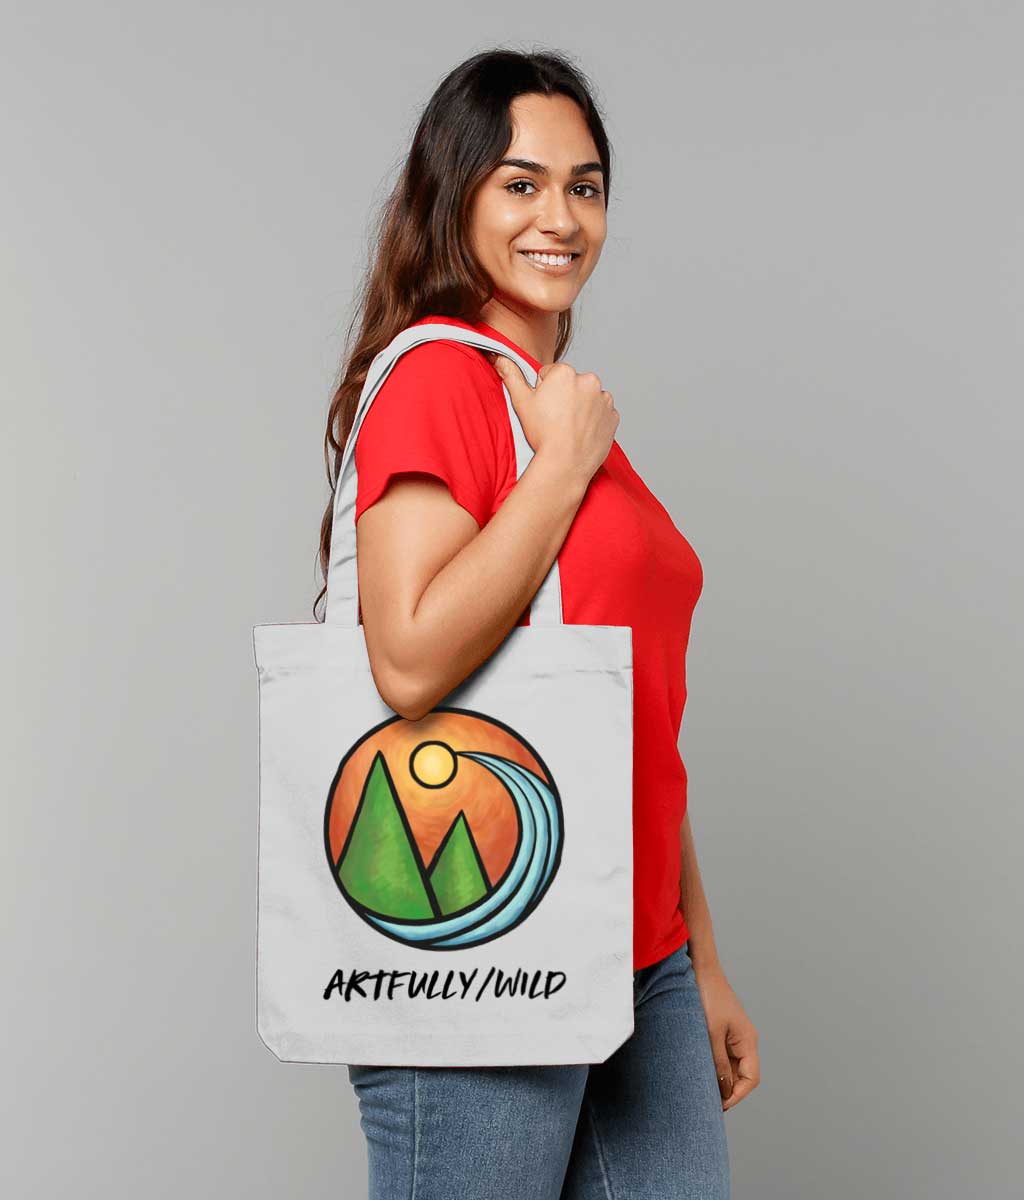 Woman modelling ARTFULLY WILD Grey Recycled Canvas Total Bag. Painted Coloured Landscape Icon. Original Illustration by Artfully/Wild UK.